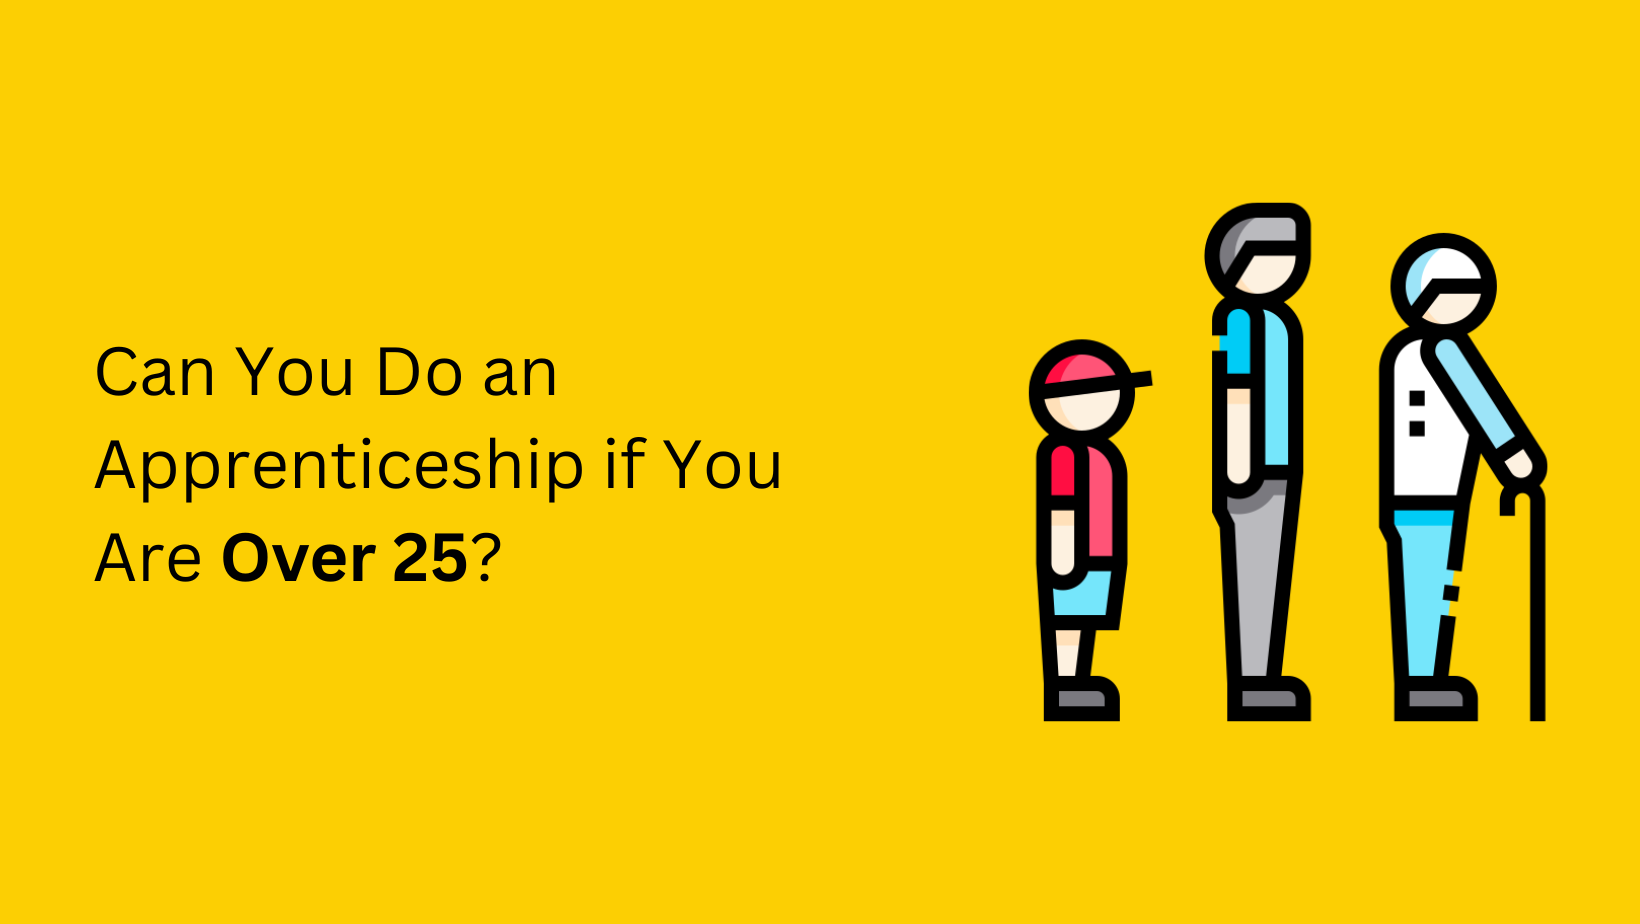 Can You Do an Apprenticeship if You Are Over 25